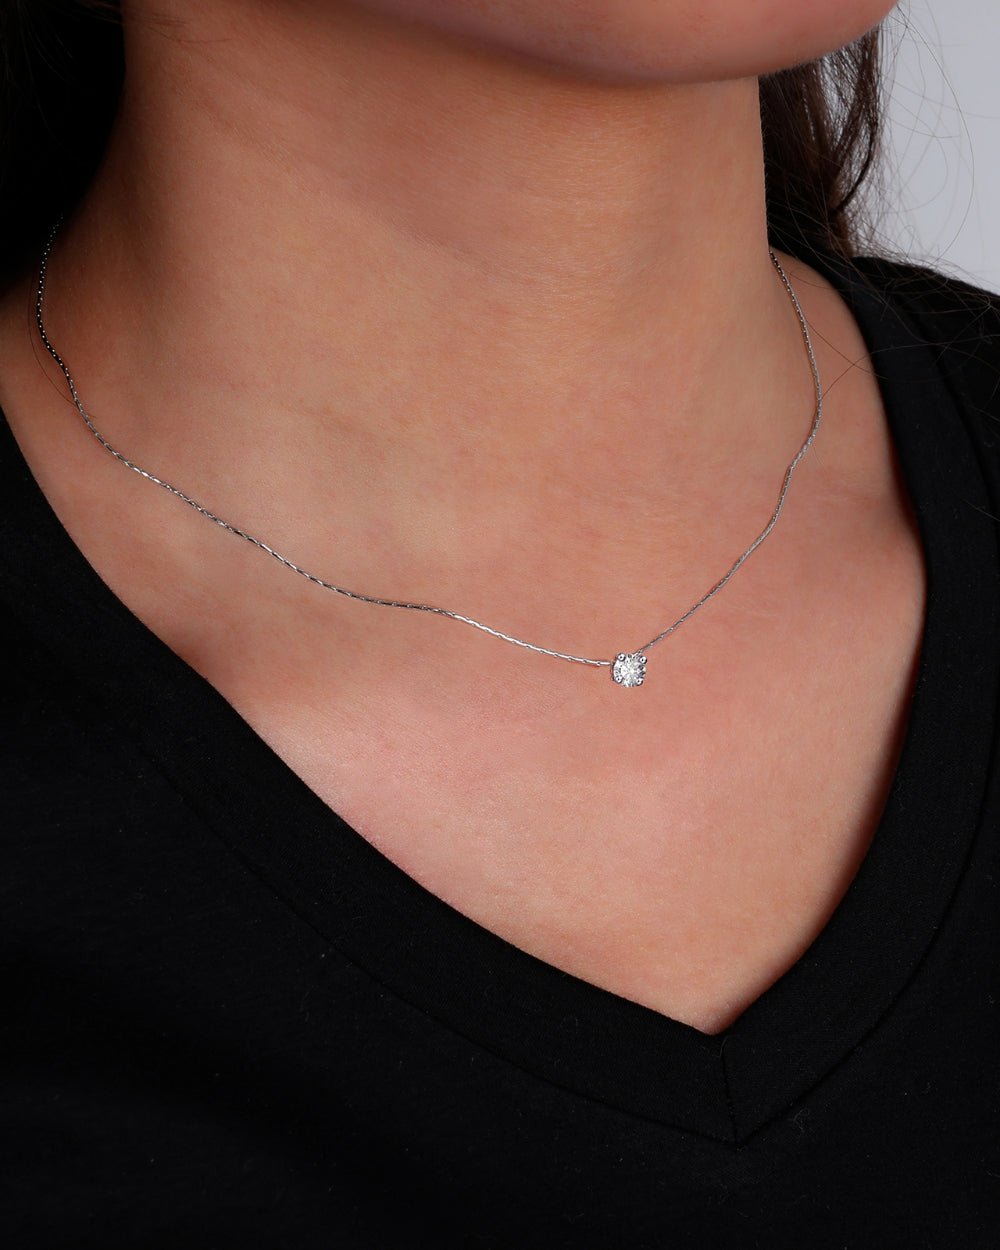 PURITY NECKLACE 925. - WHITE GOLD - Drippy Amsterdam